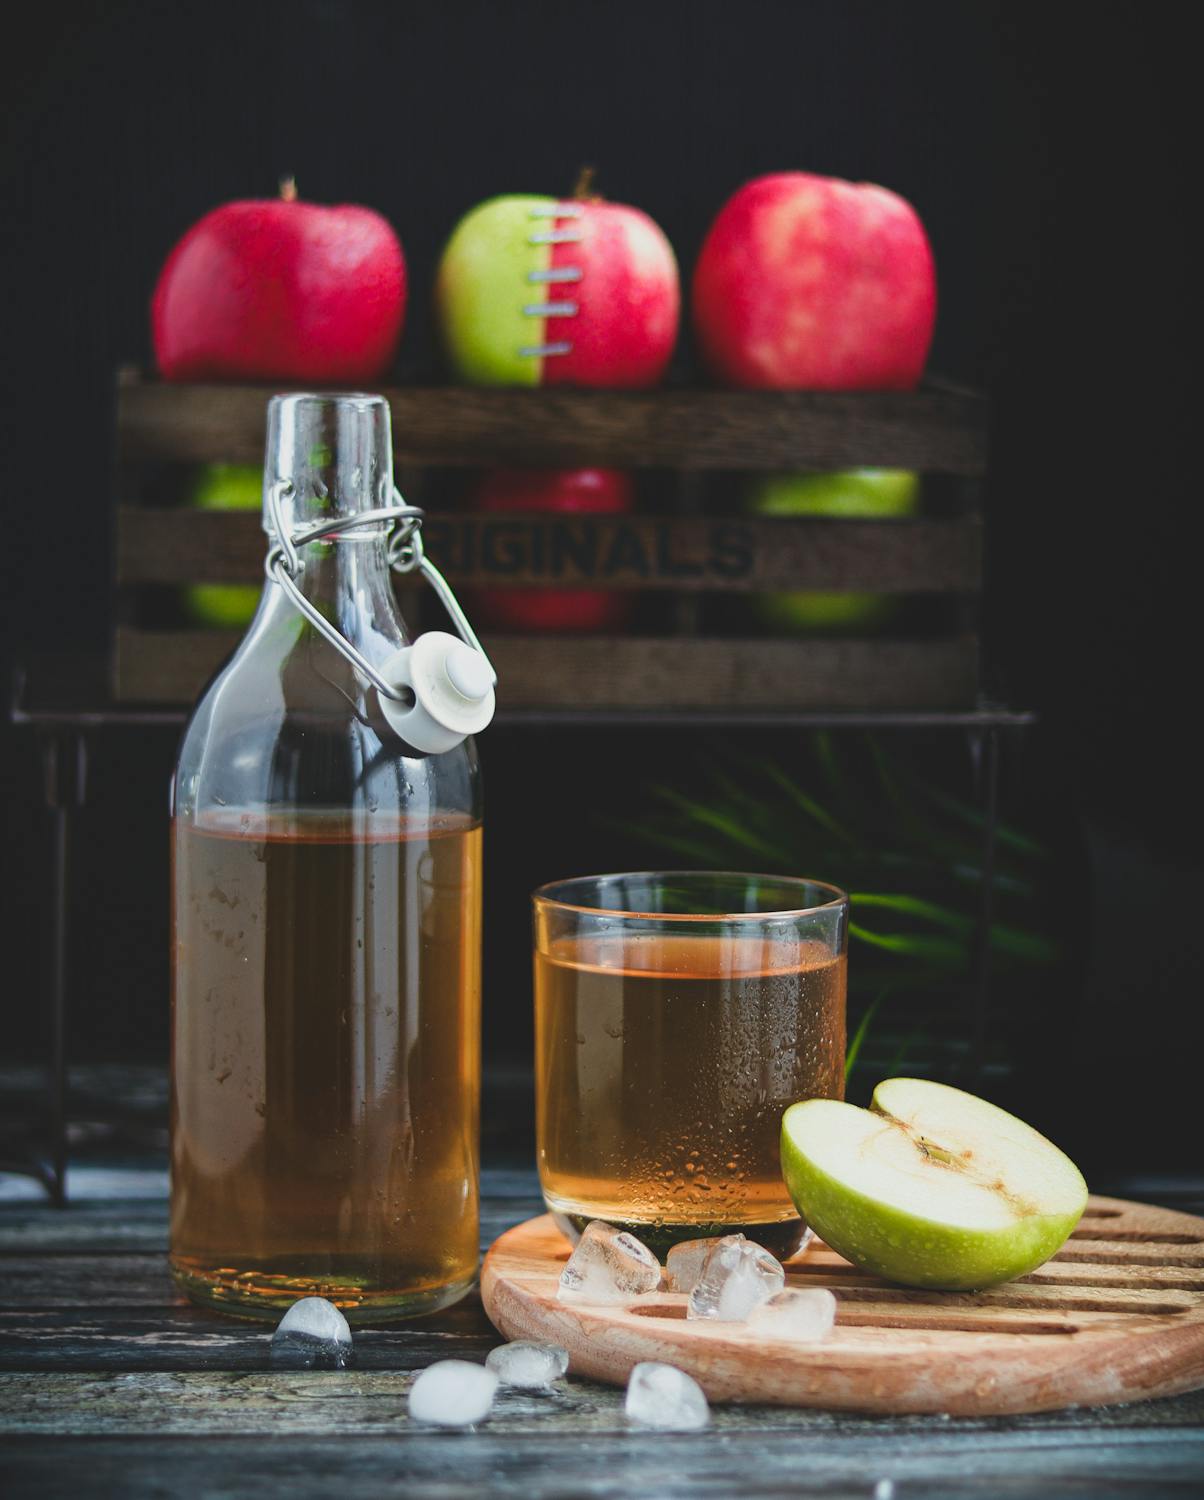 apple cider vinegar and a green apple on wooden board